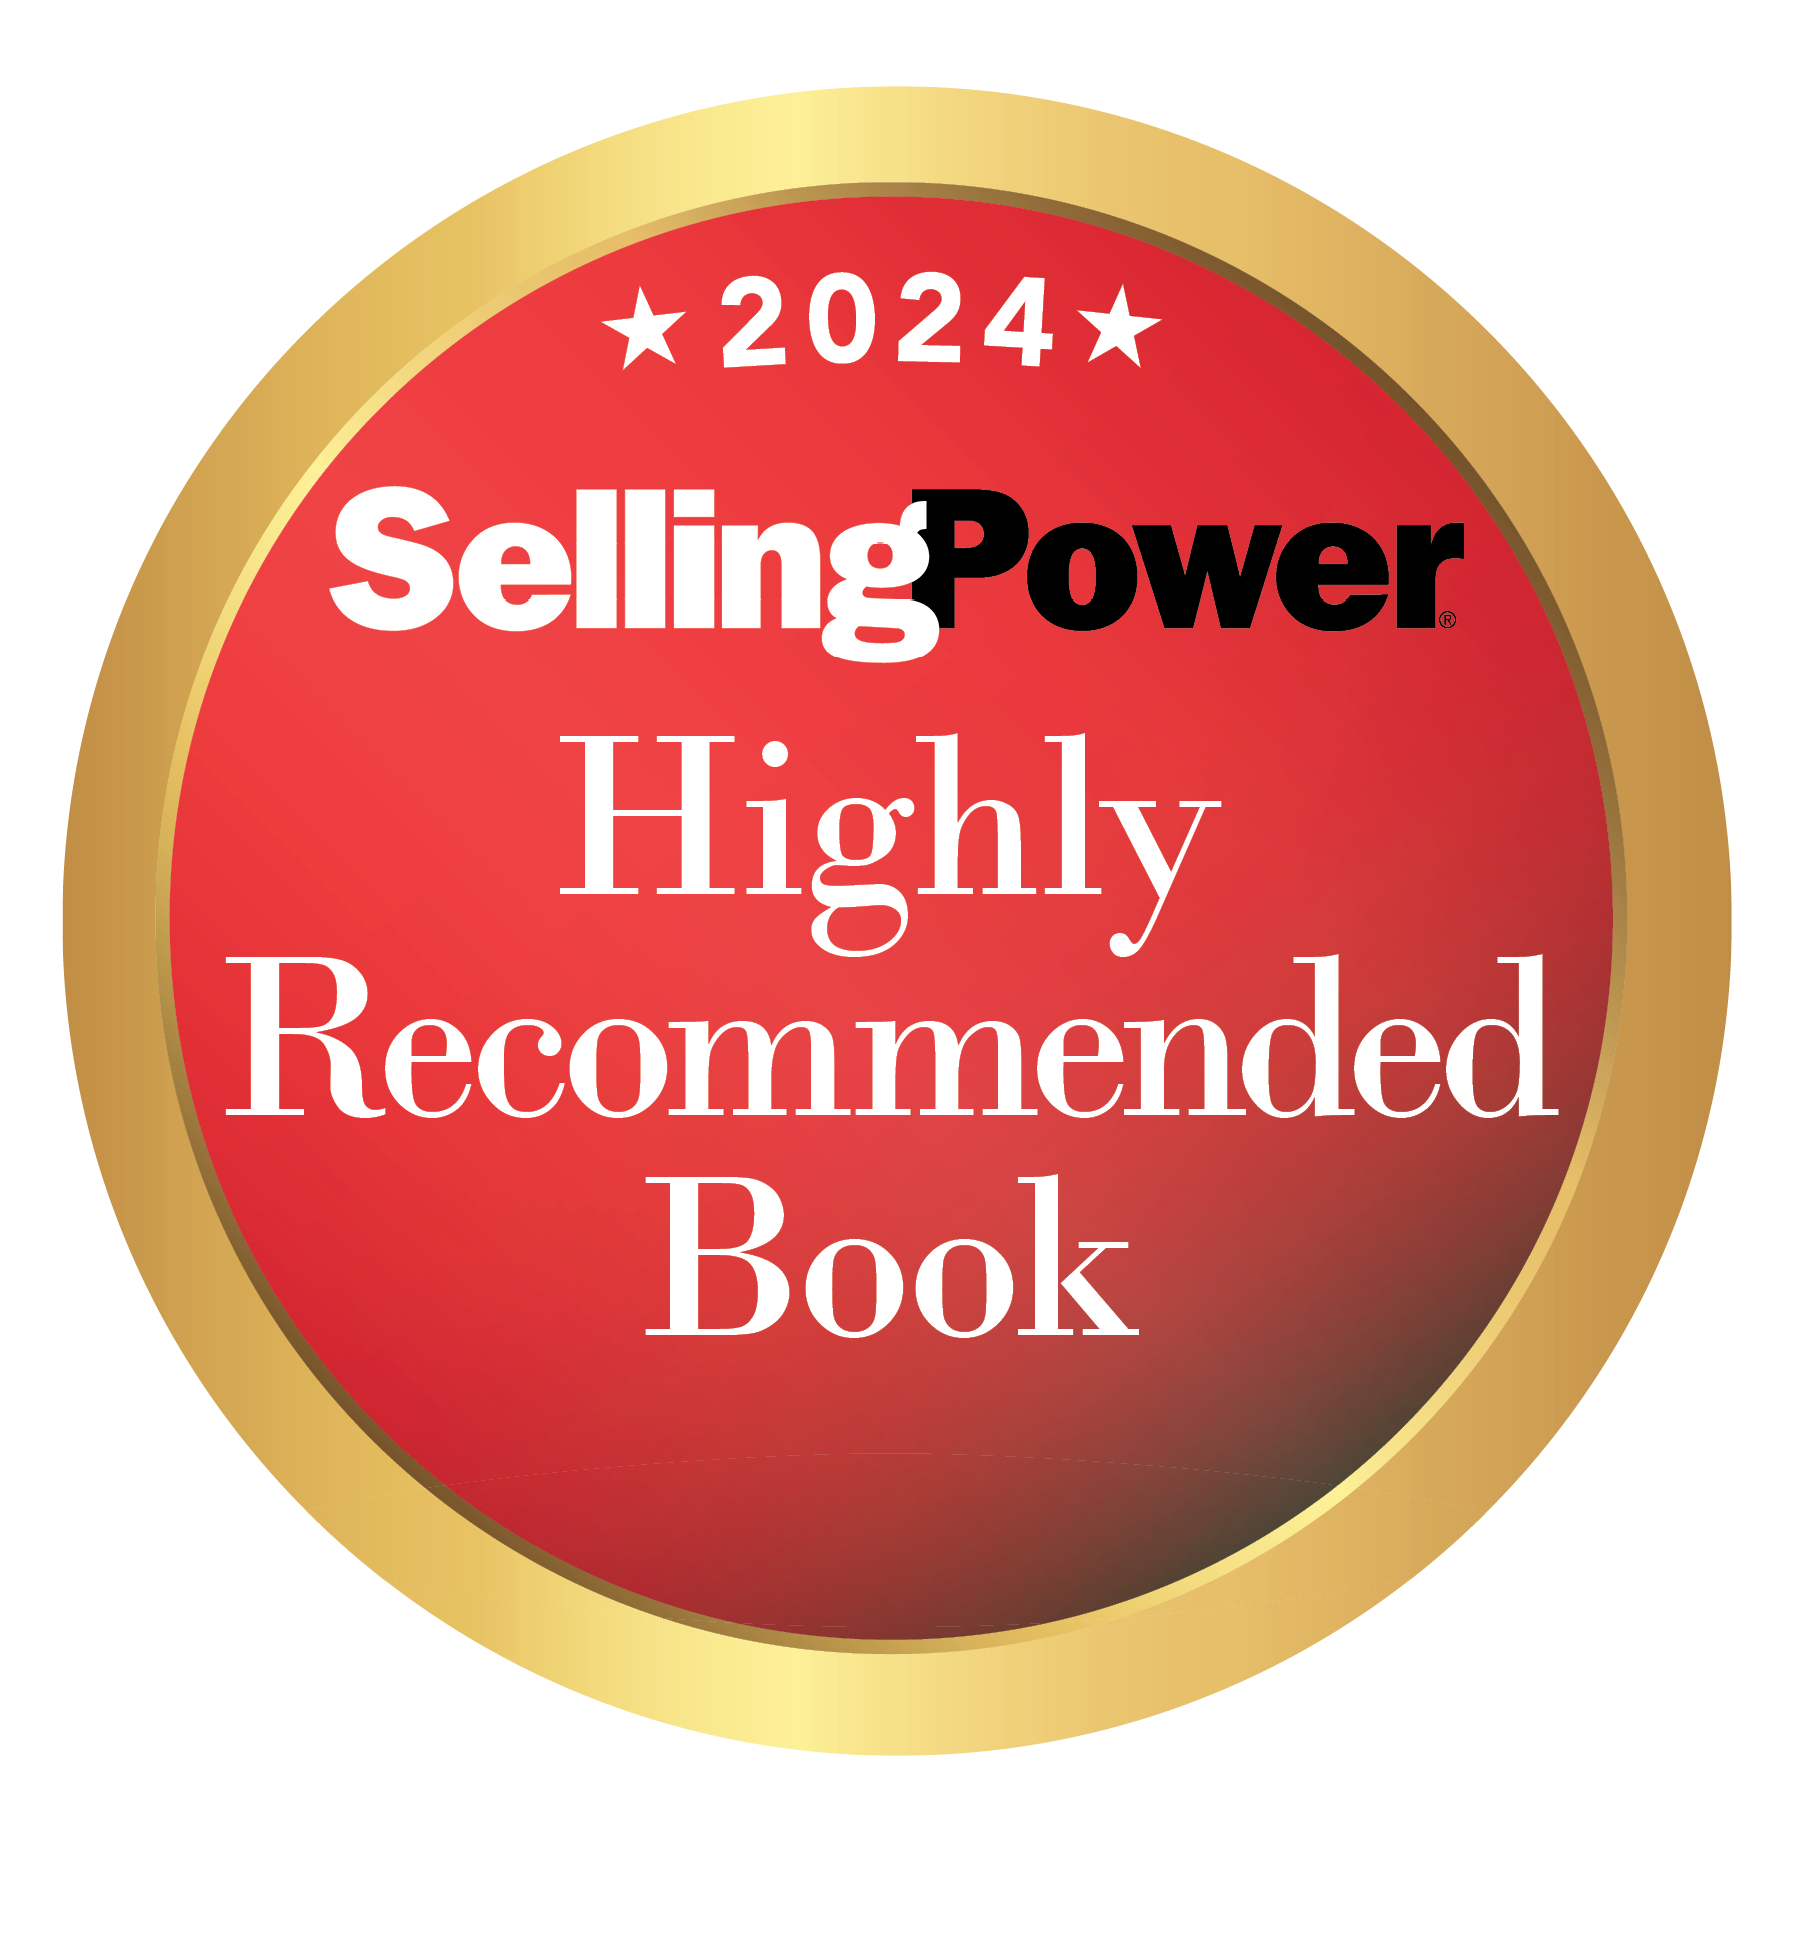 Logo for the Selling Power Highly Recommended Books 2024